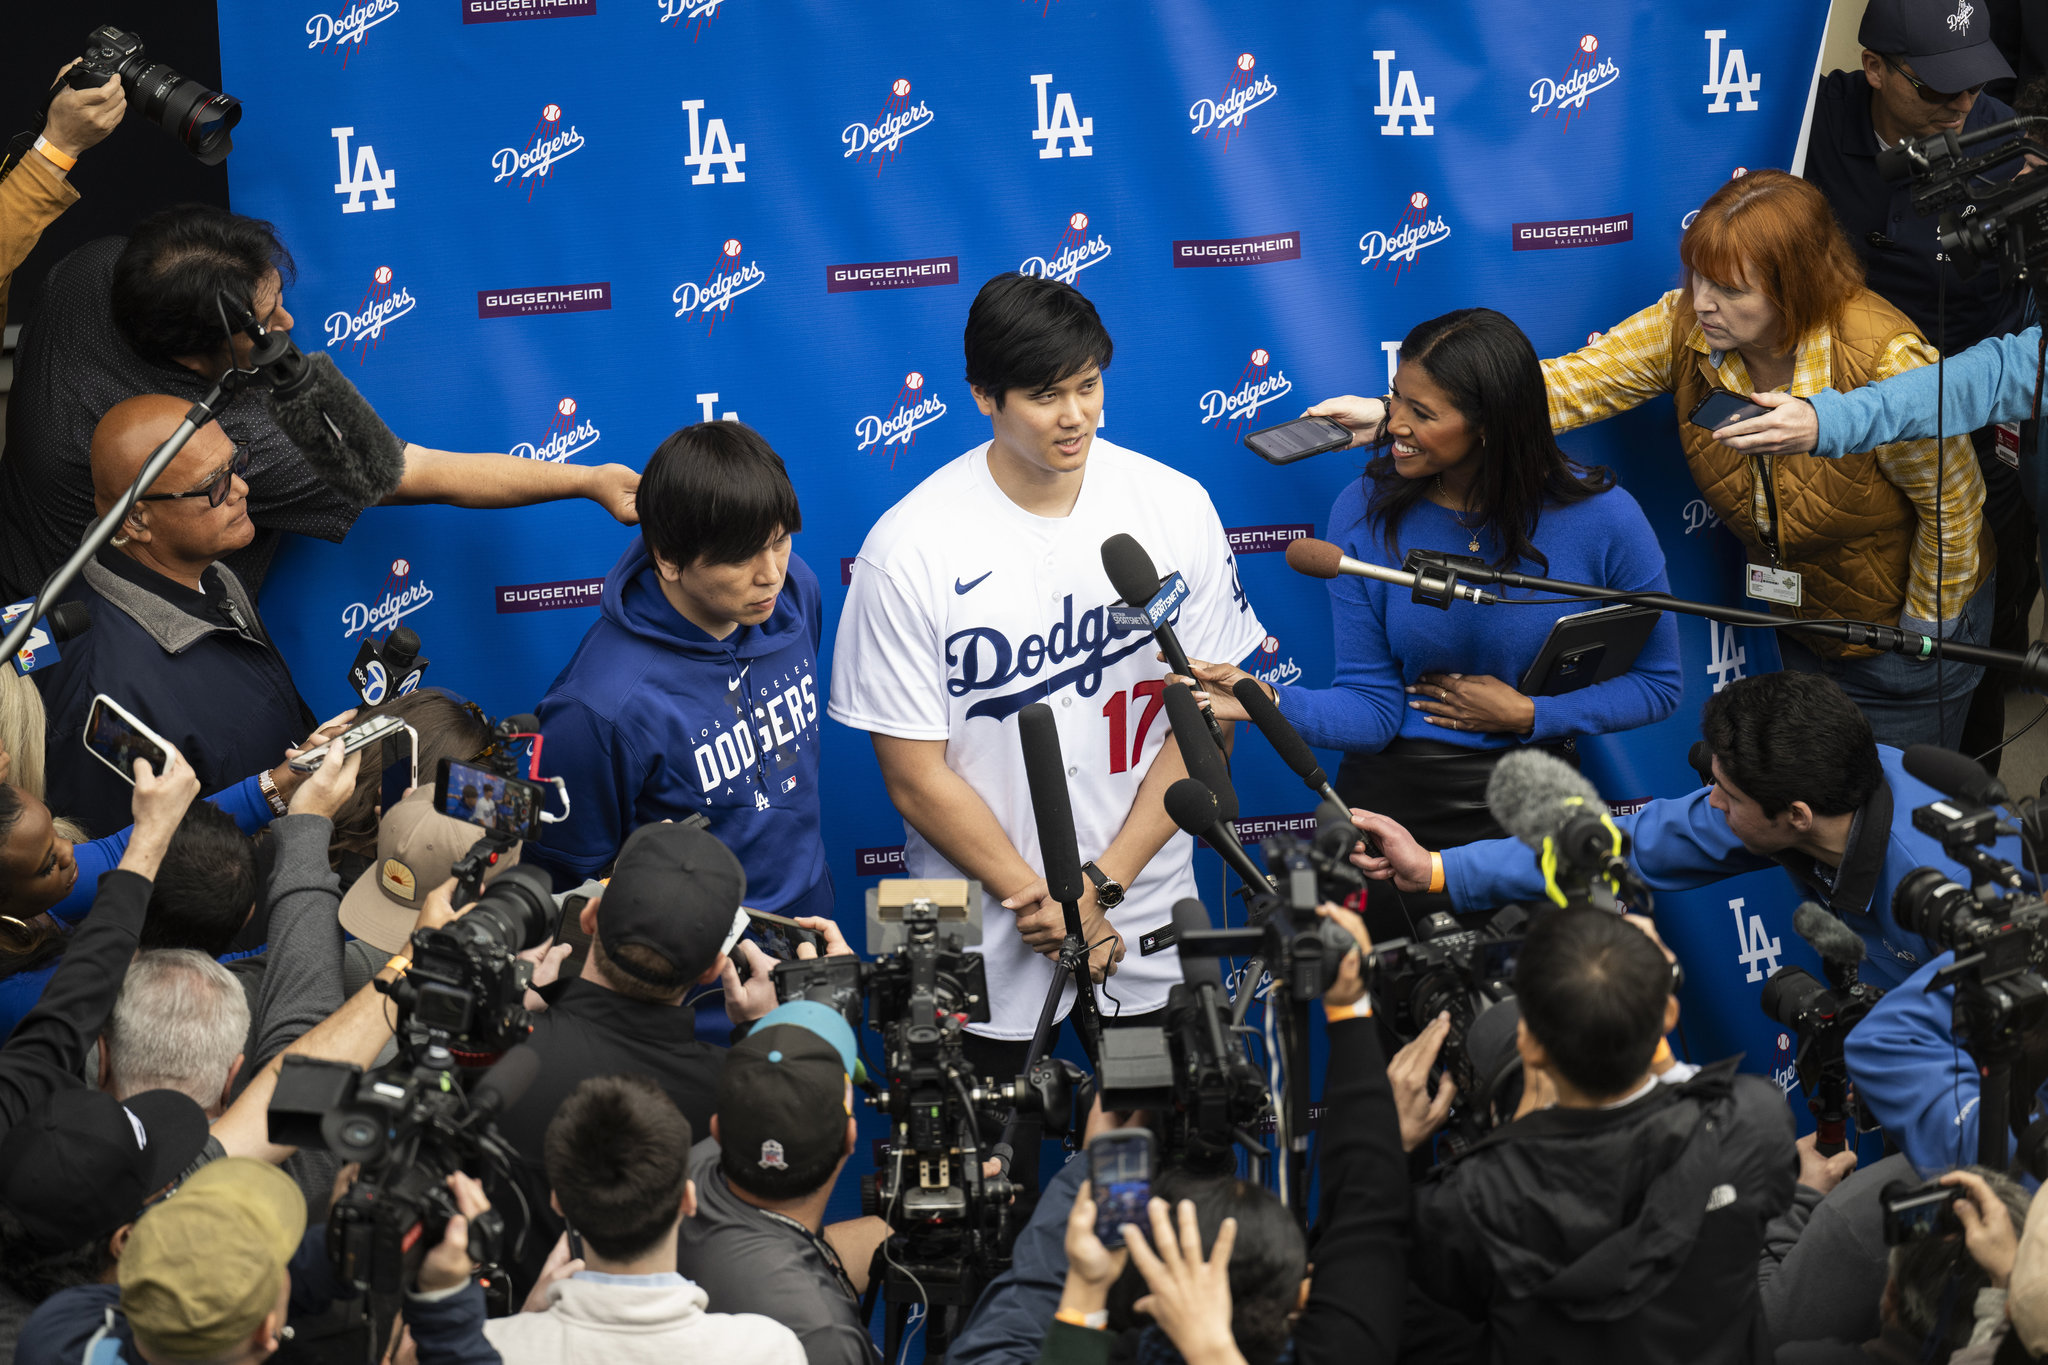 Ohtanimania descends upon Dodger Stadium, as the superstar makes first public appearance in blue.